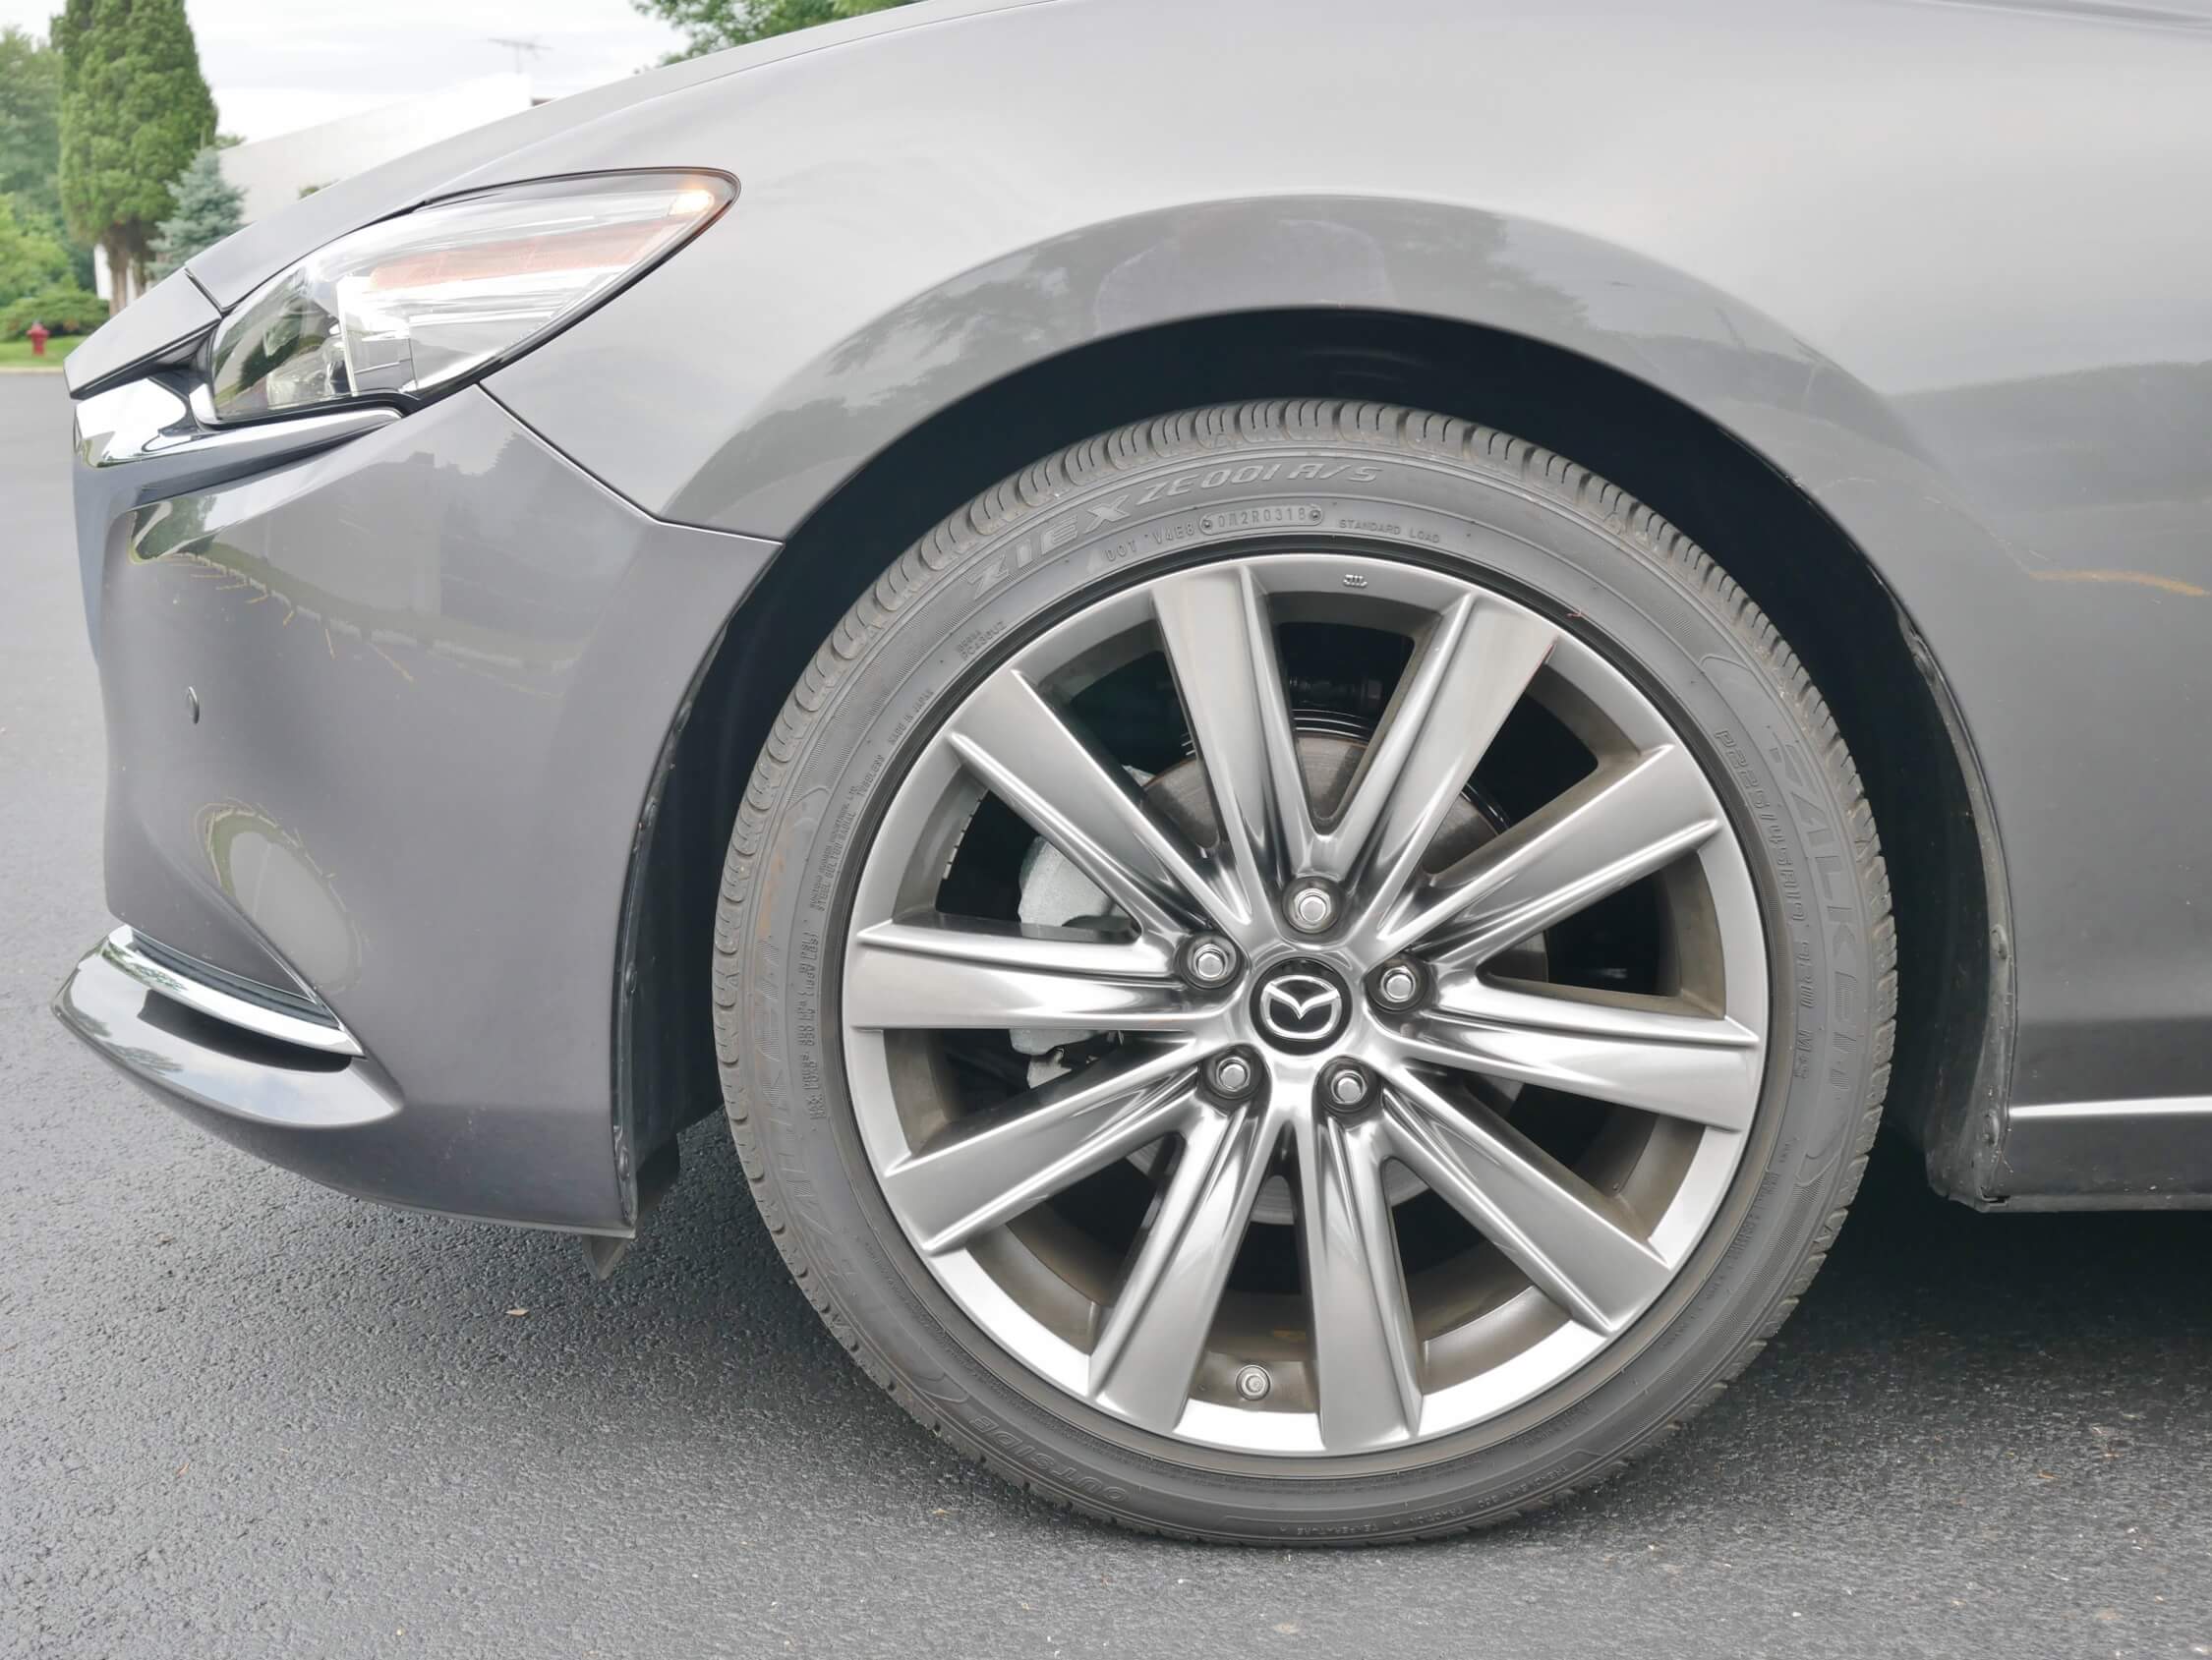 2018 Mazda6 Signature 2.5T: Still on 19" wheels, w/ precise & linear steering offering feedback, more pliant W-rated all season Falken tires & hydraulic bushings soften blows, trading off some grip. Brake pedal effort remains linear though with softer initial bite.